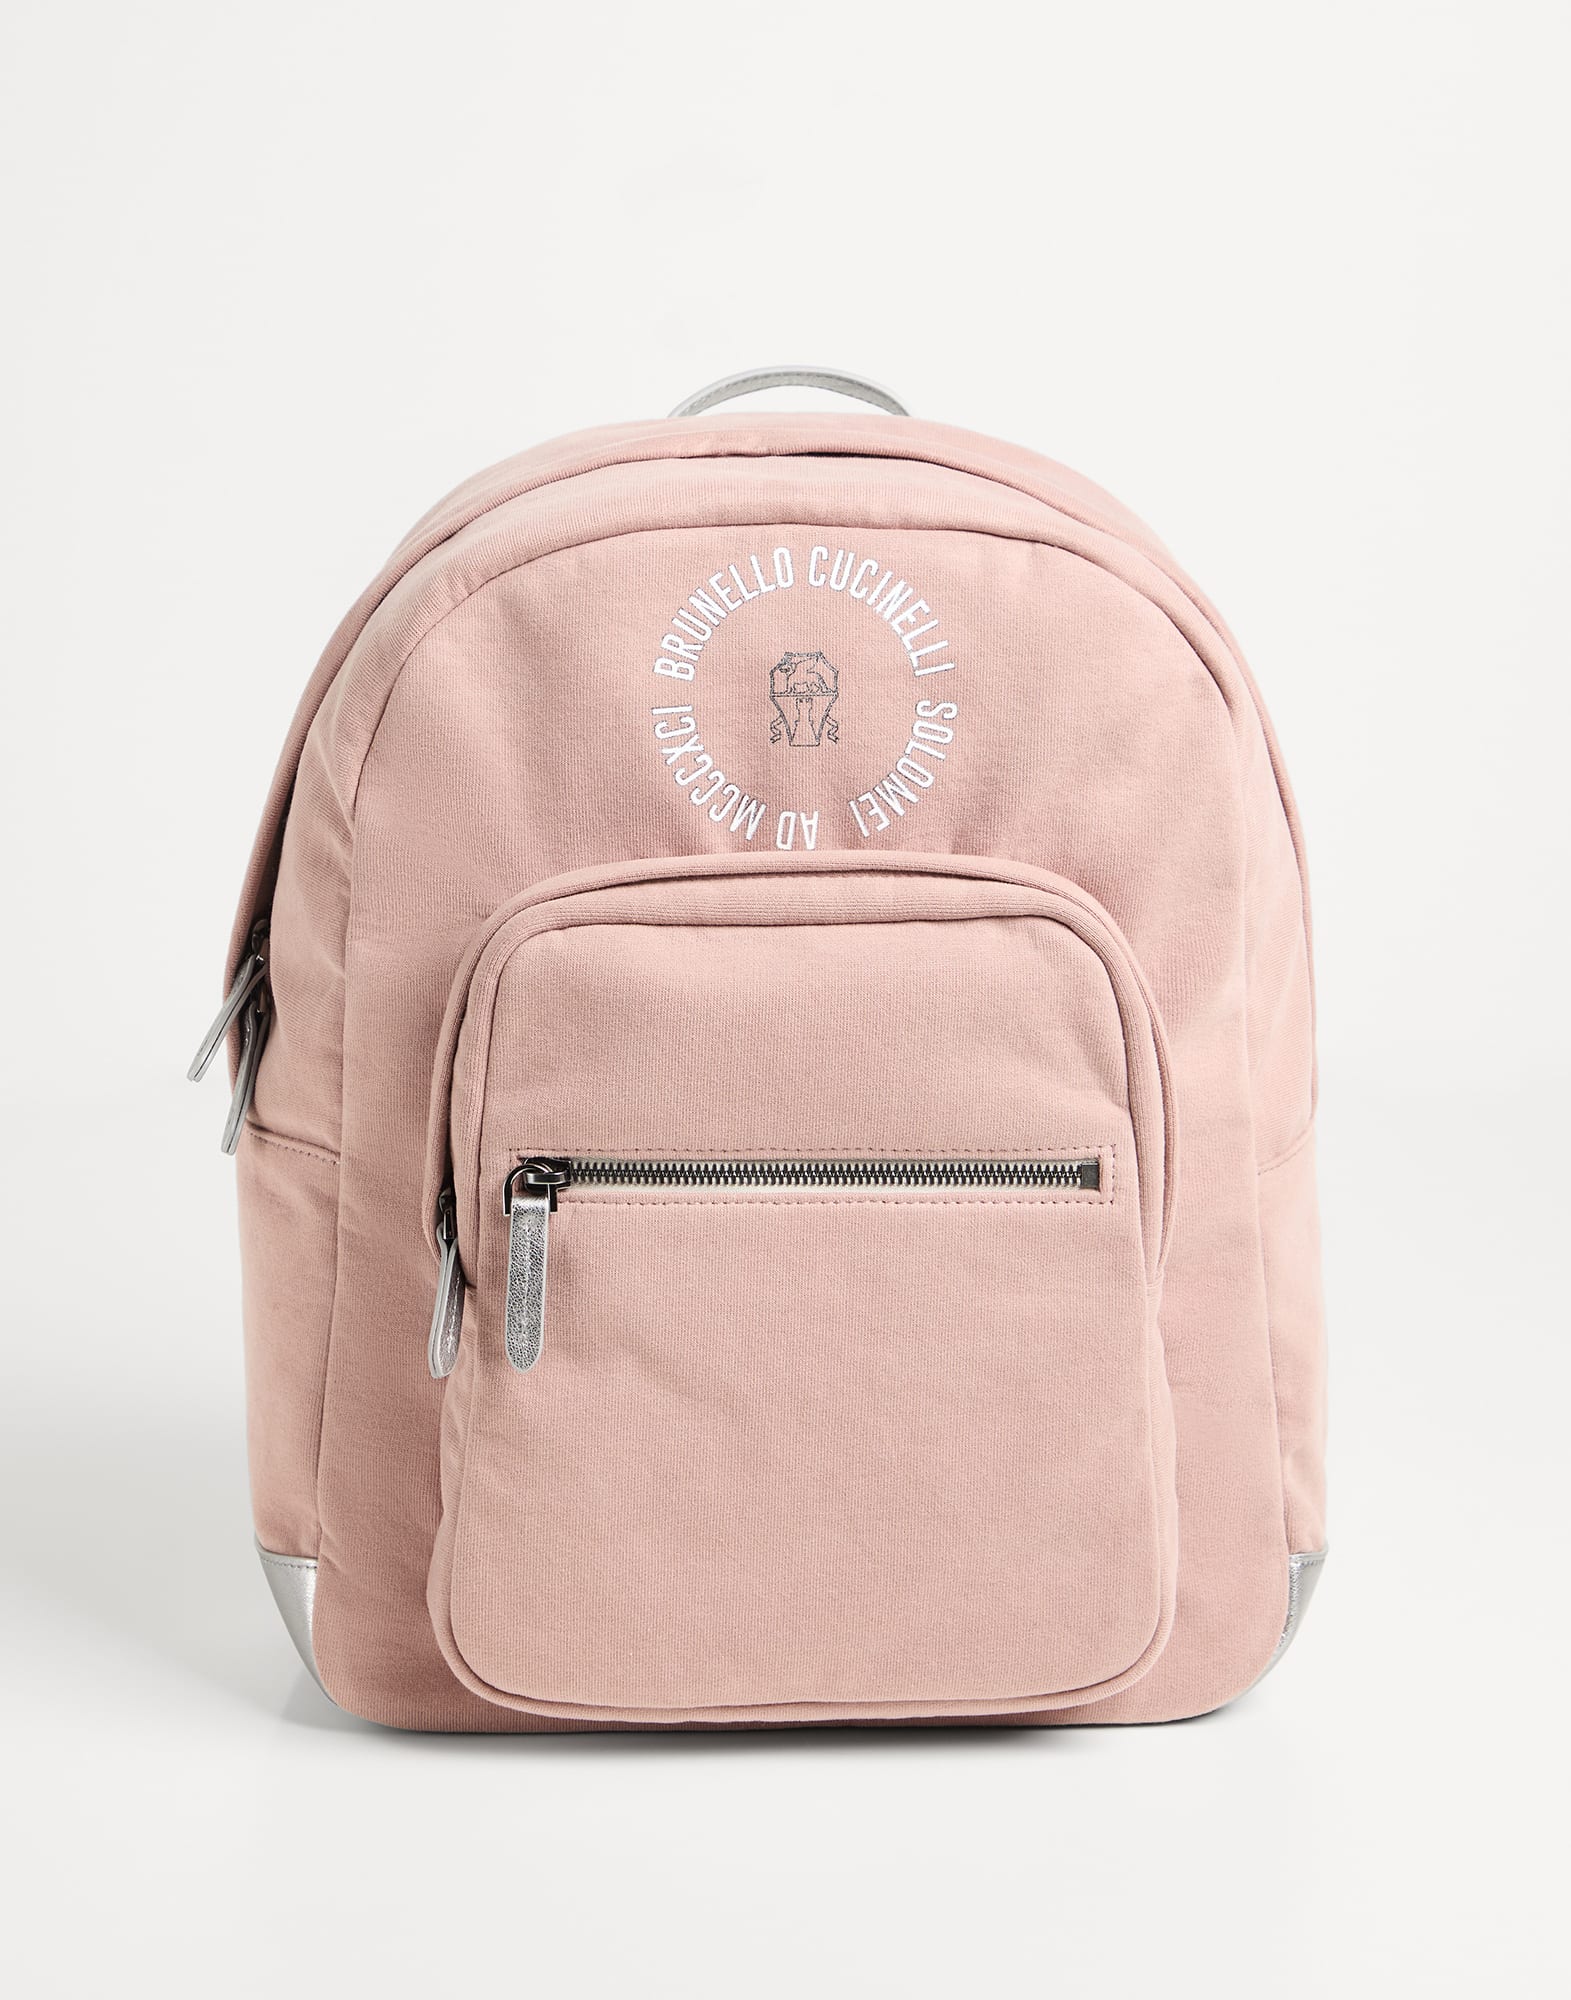 French terry backpack